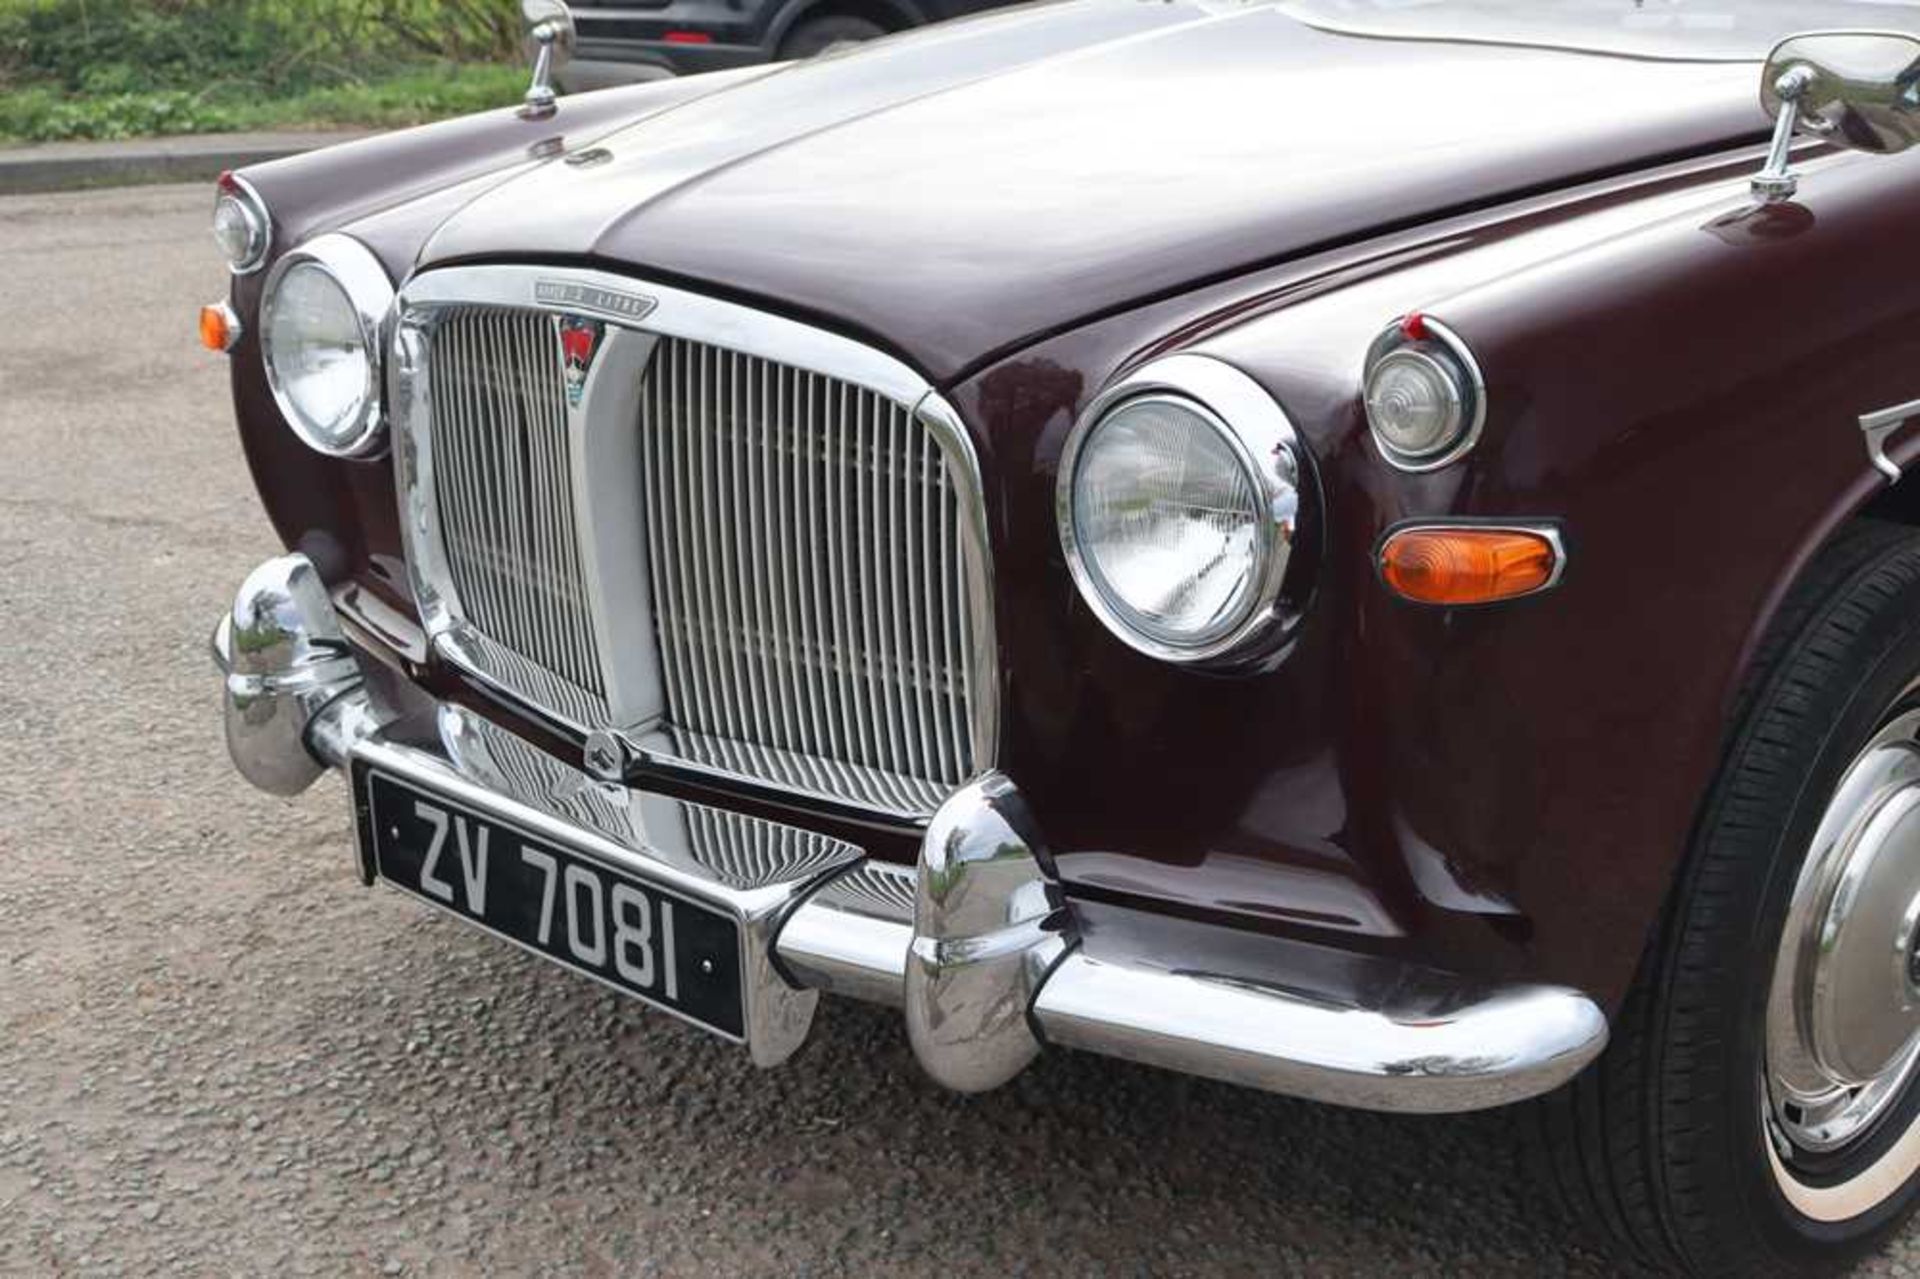 1964 Rover P5 3-Litre Coupe - Image 9 of 41